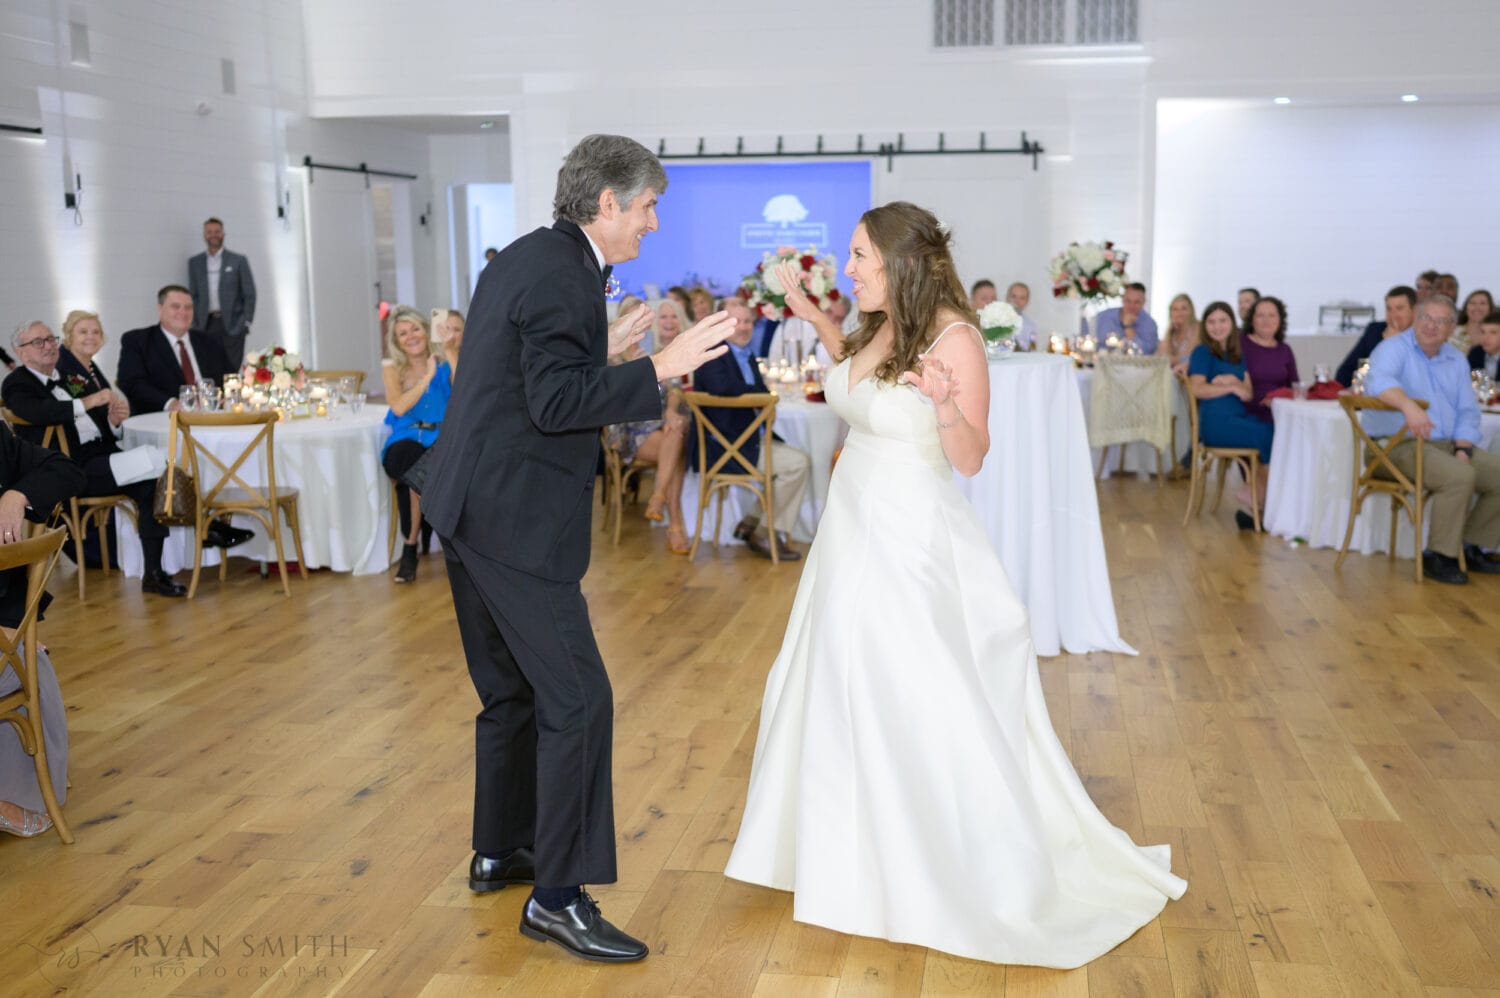 Dad and daughter having fun first dance - The Venue at White Oaks Farm